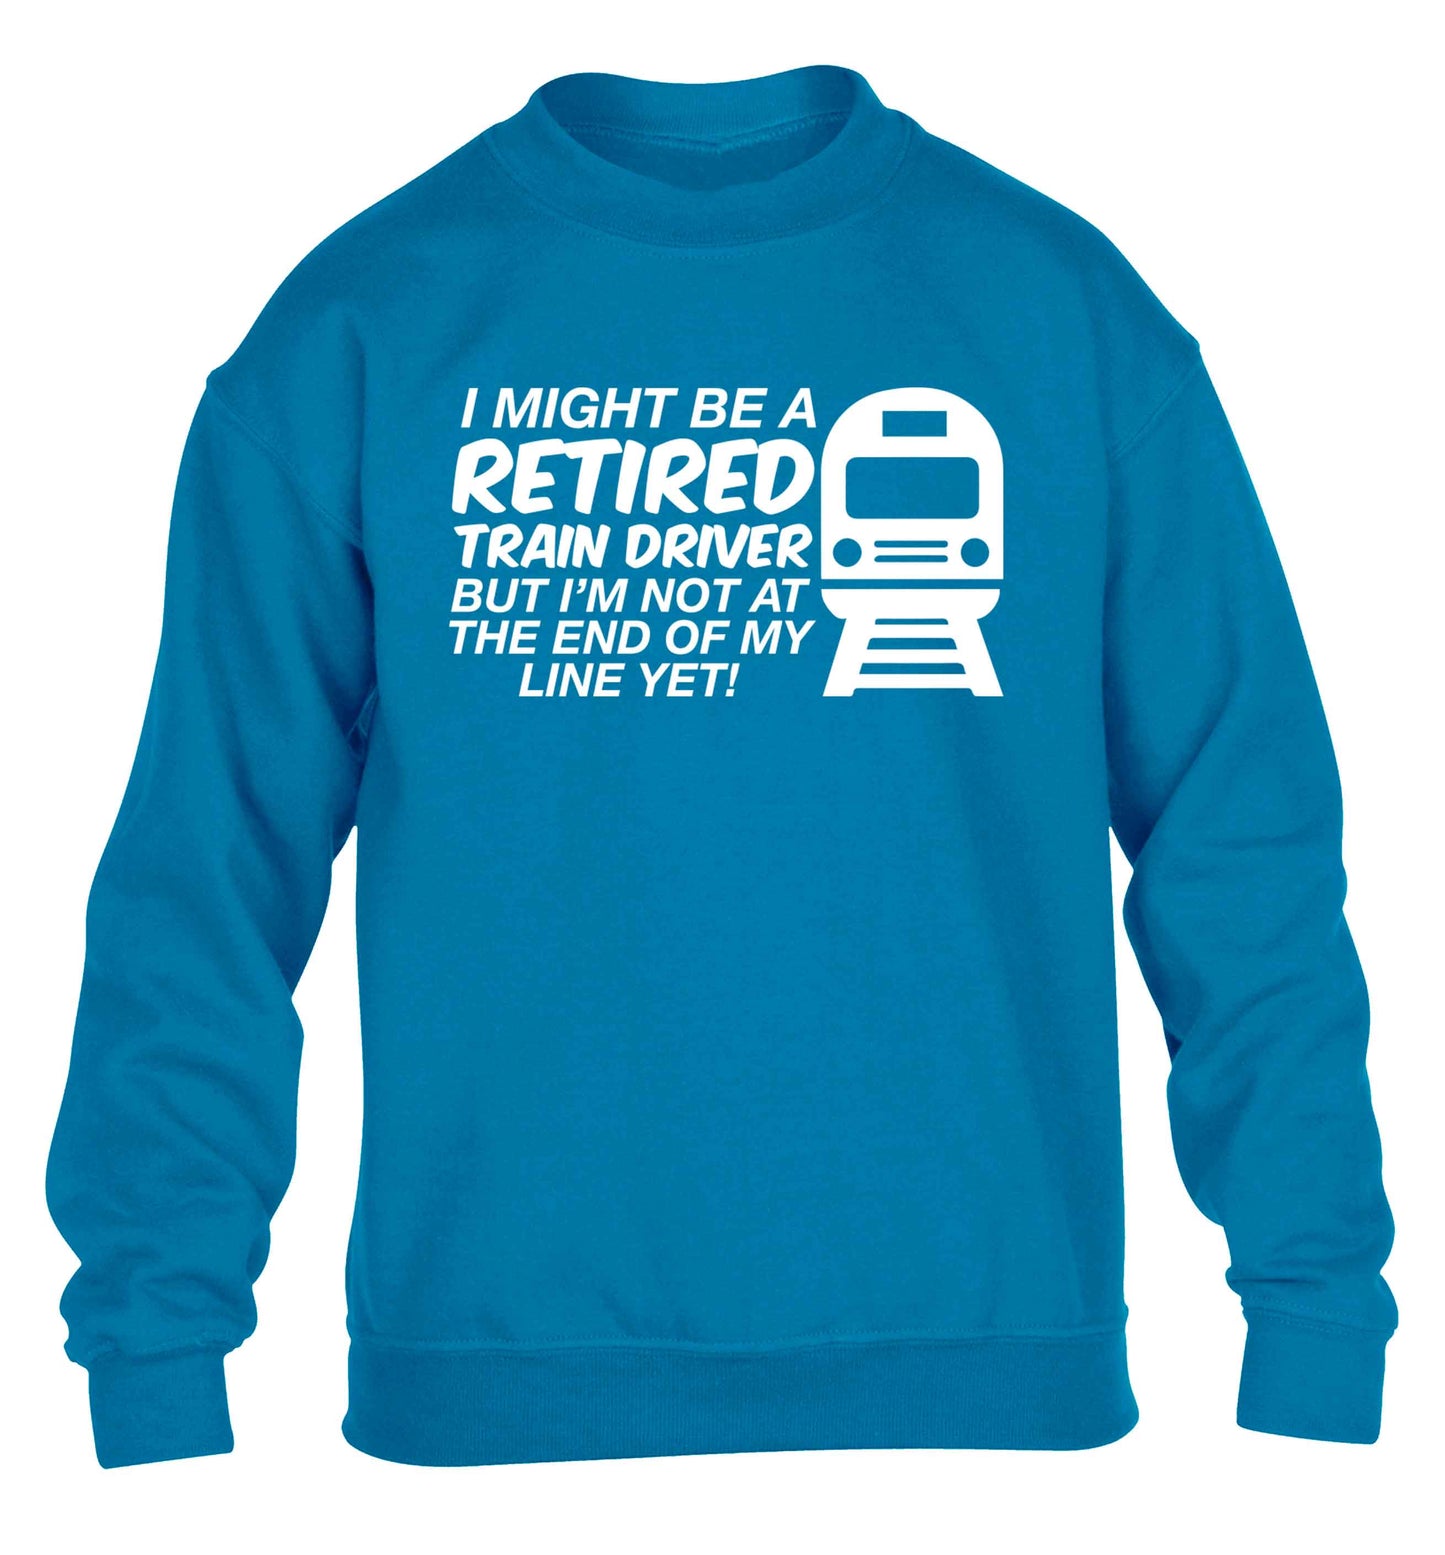 Retired train driver but I'm not at the end of my line yet children's blue sweater 12-13 Years